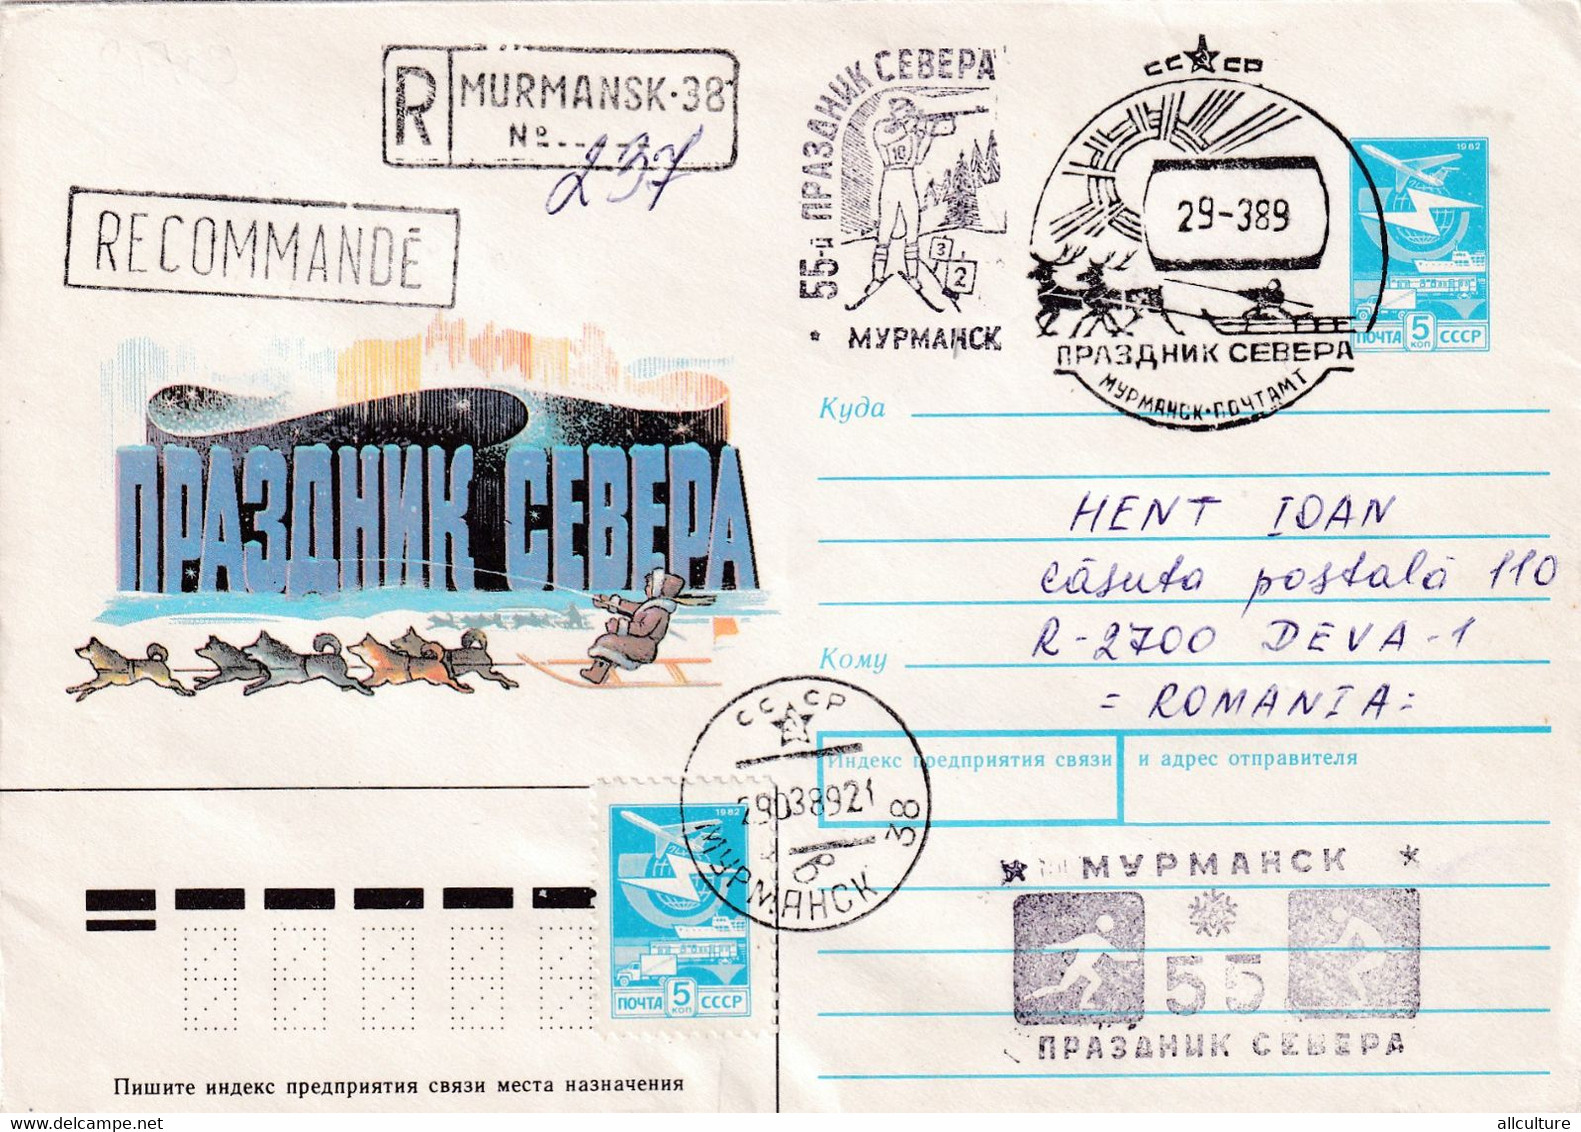 A8152- REGISTRED LETTER MURMANSK, HOLIDAY OF THE NORTH, 1989 USSR POSTAL STATIONERY SENT TO DEVA ROMANIA - Events & Gedenkfeiern